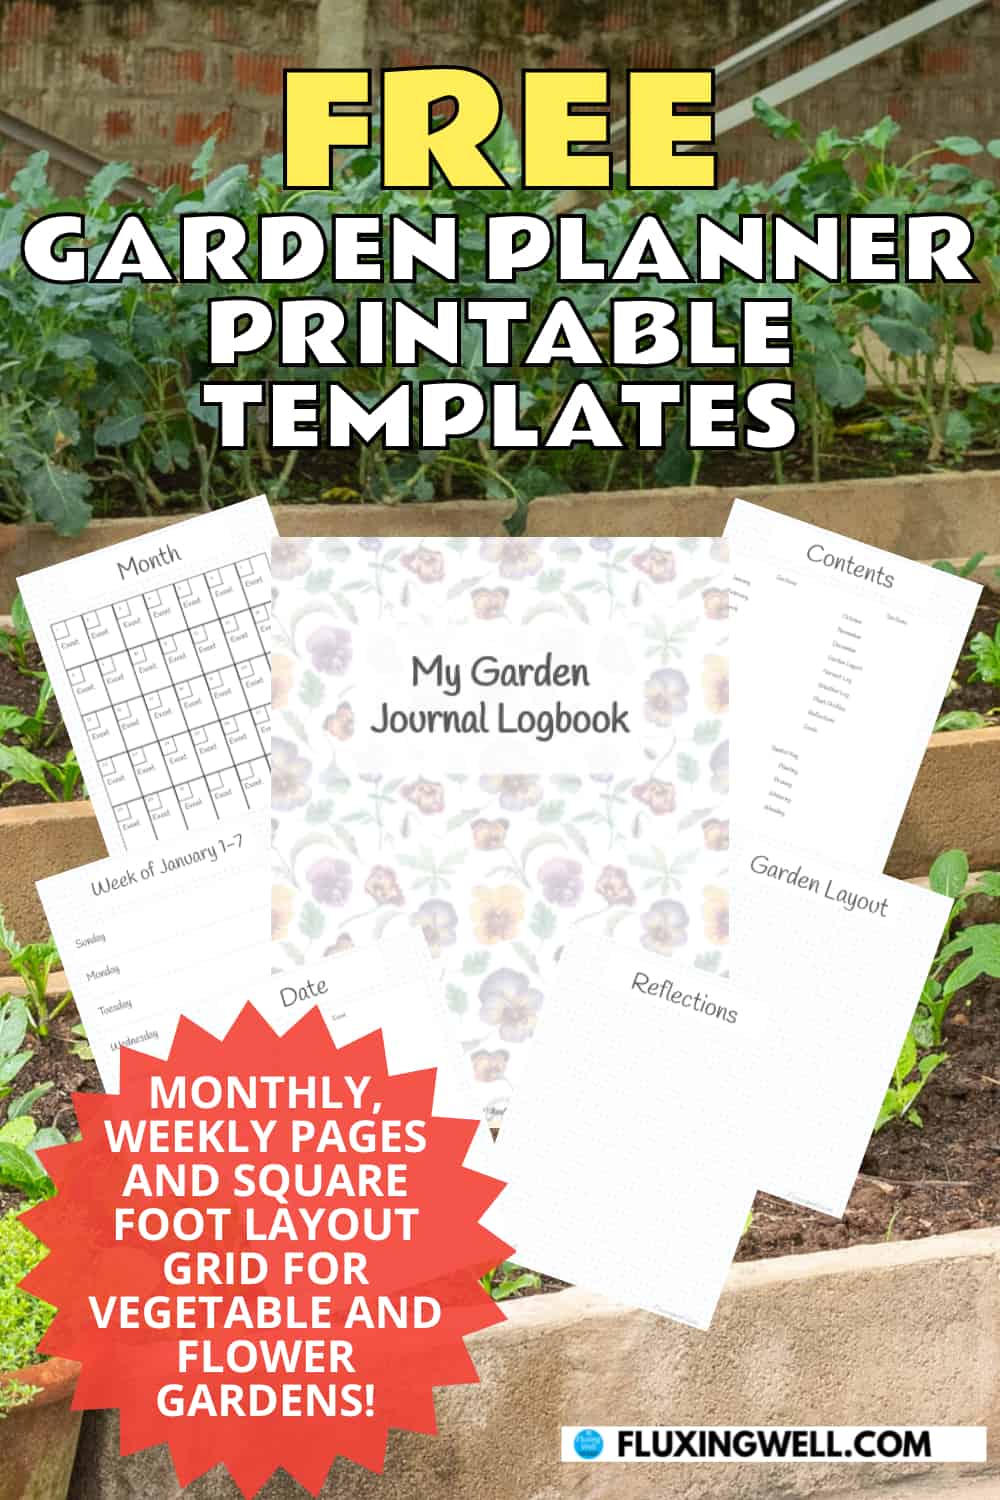 free garden planner printable templates for vegetable and flower gardens journal logbook page collage